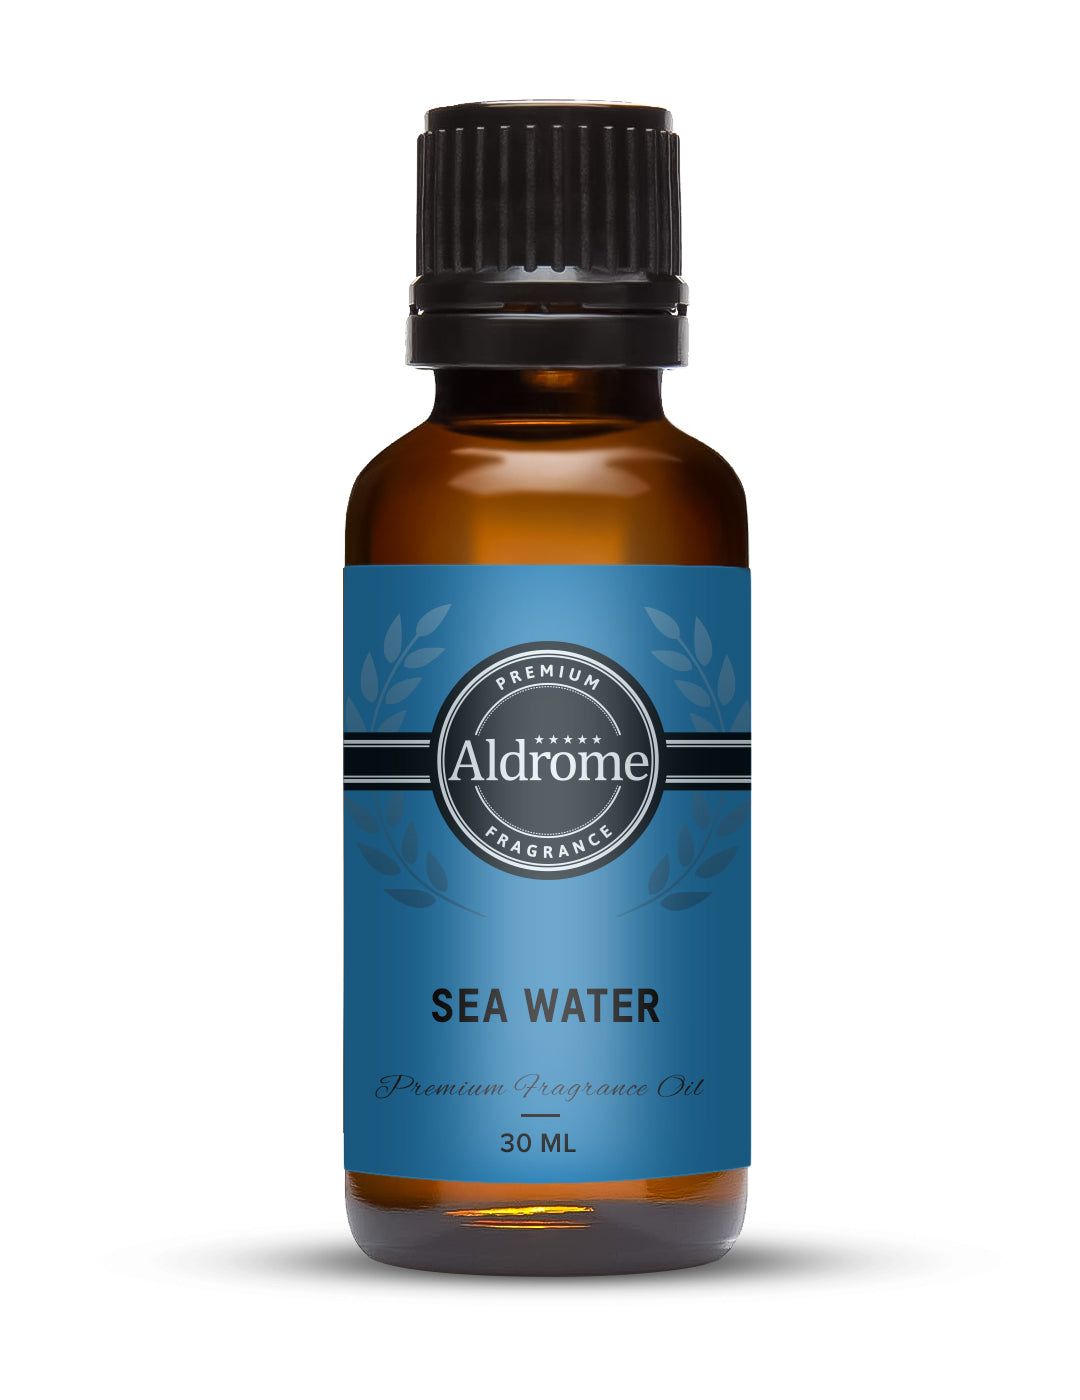 Sea Water Fragrance Oil - 30ml | Buy Sea Water Fragrance Oils Online at Best Prices